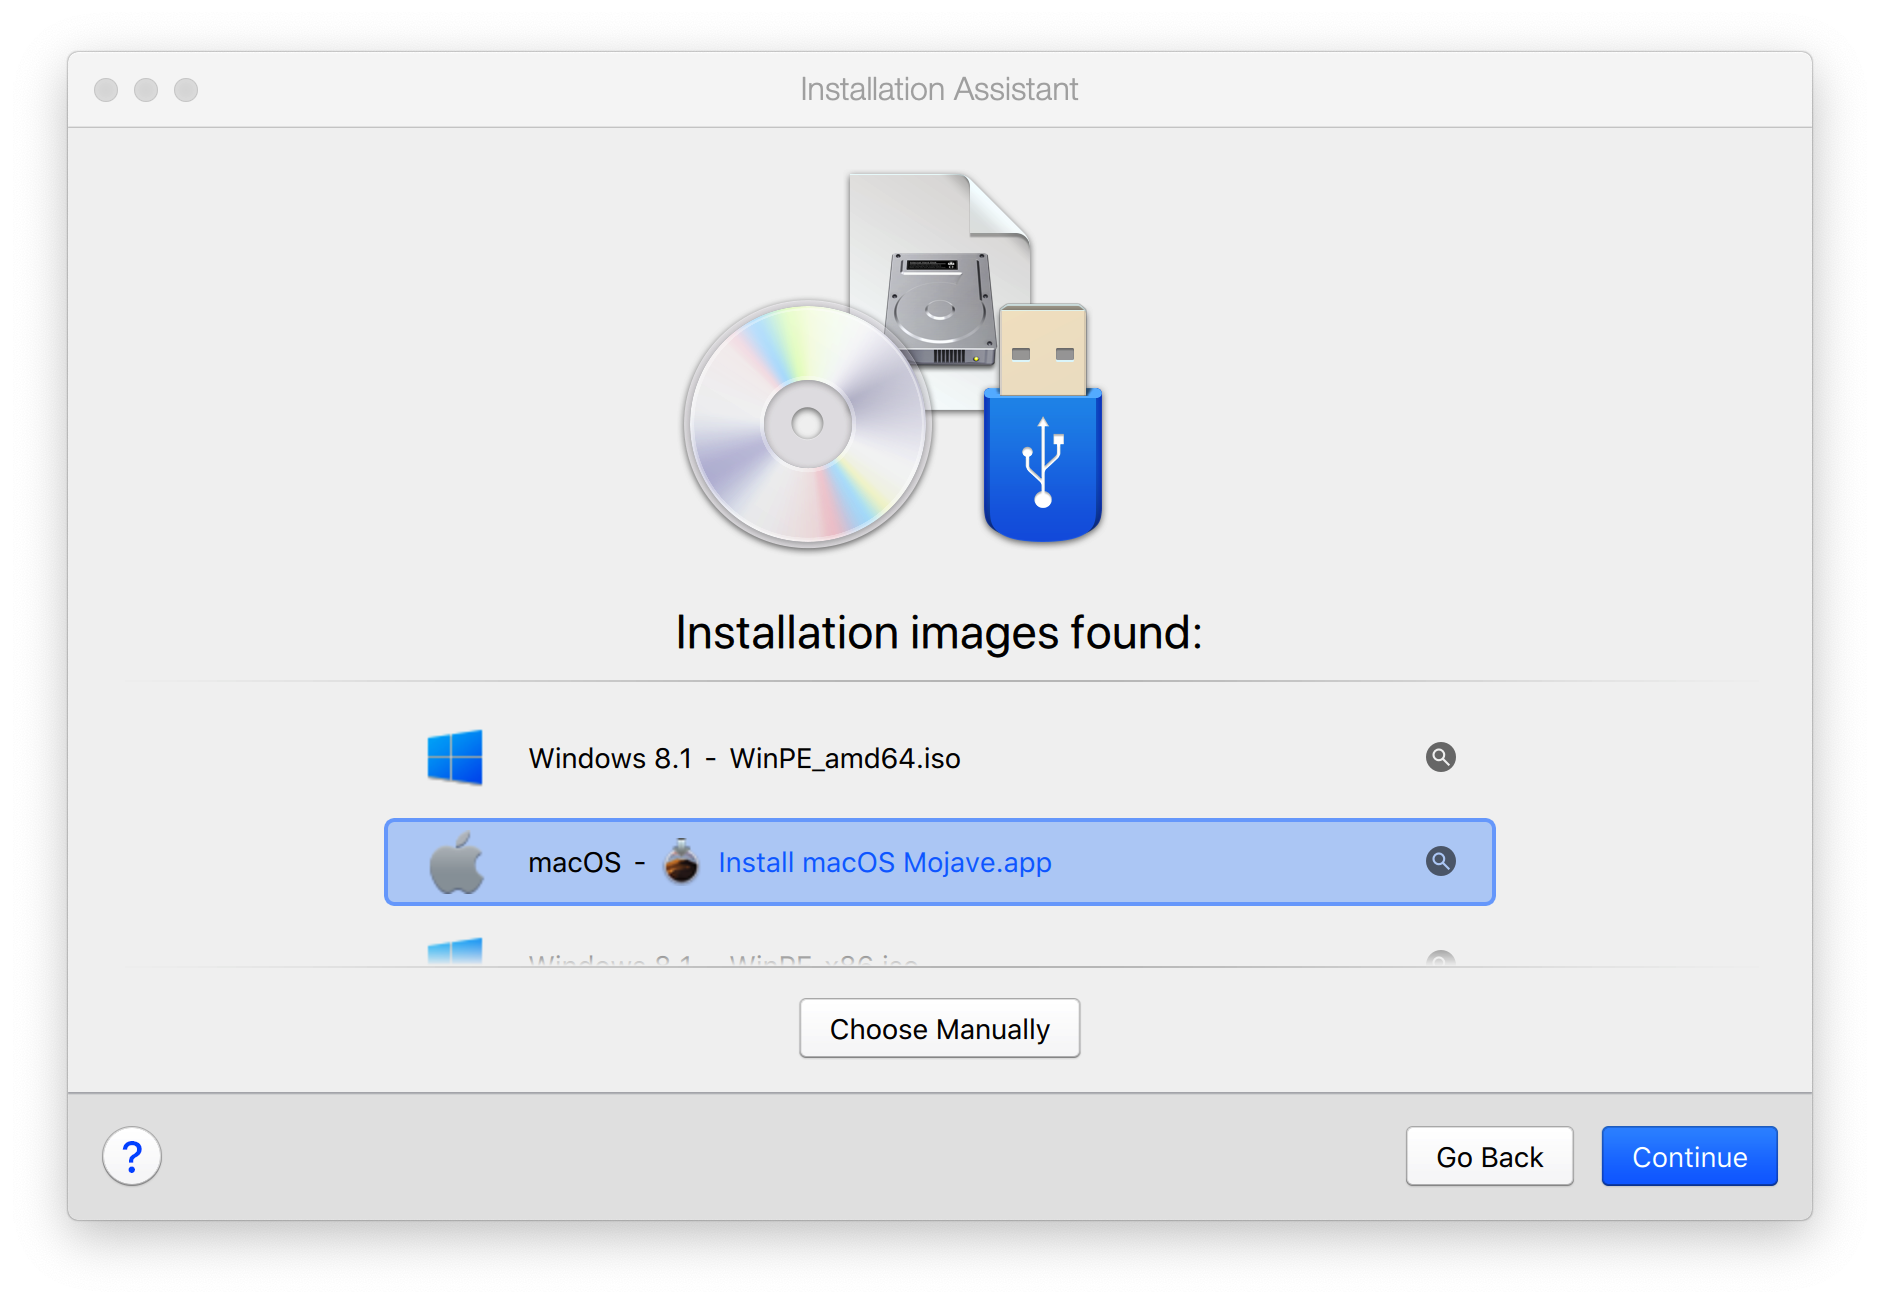 parallels for mac 10.5.8 free download